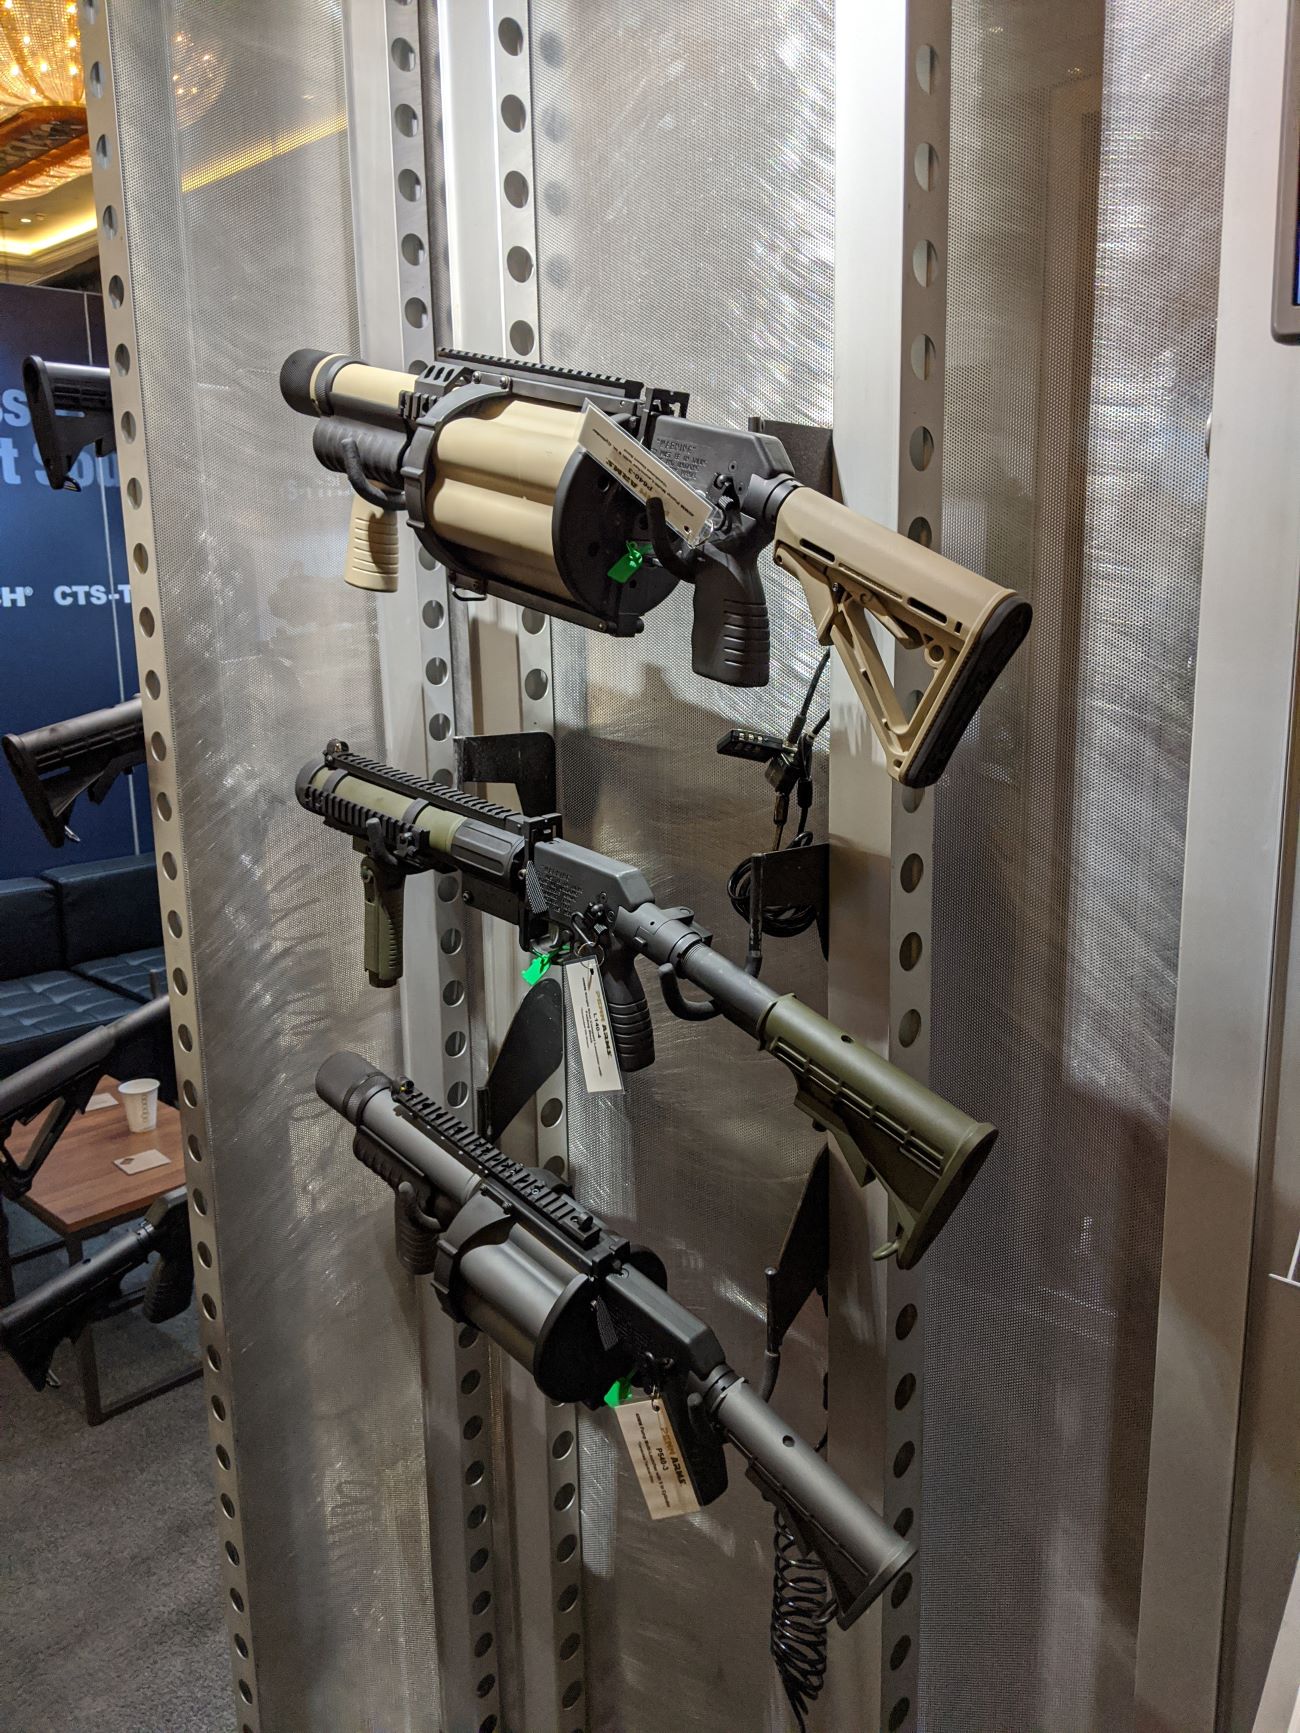 Lethal semiautomatic weapons on display